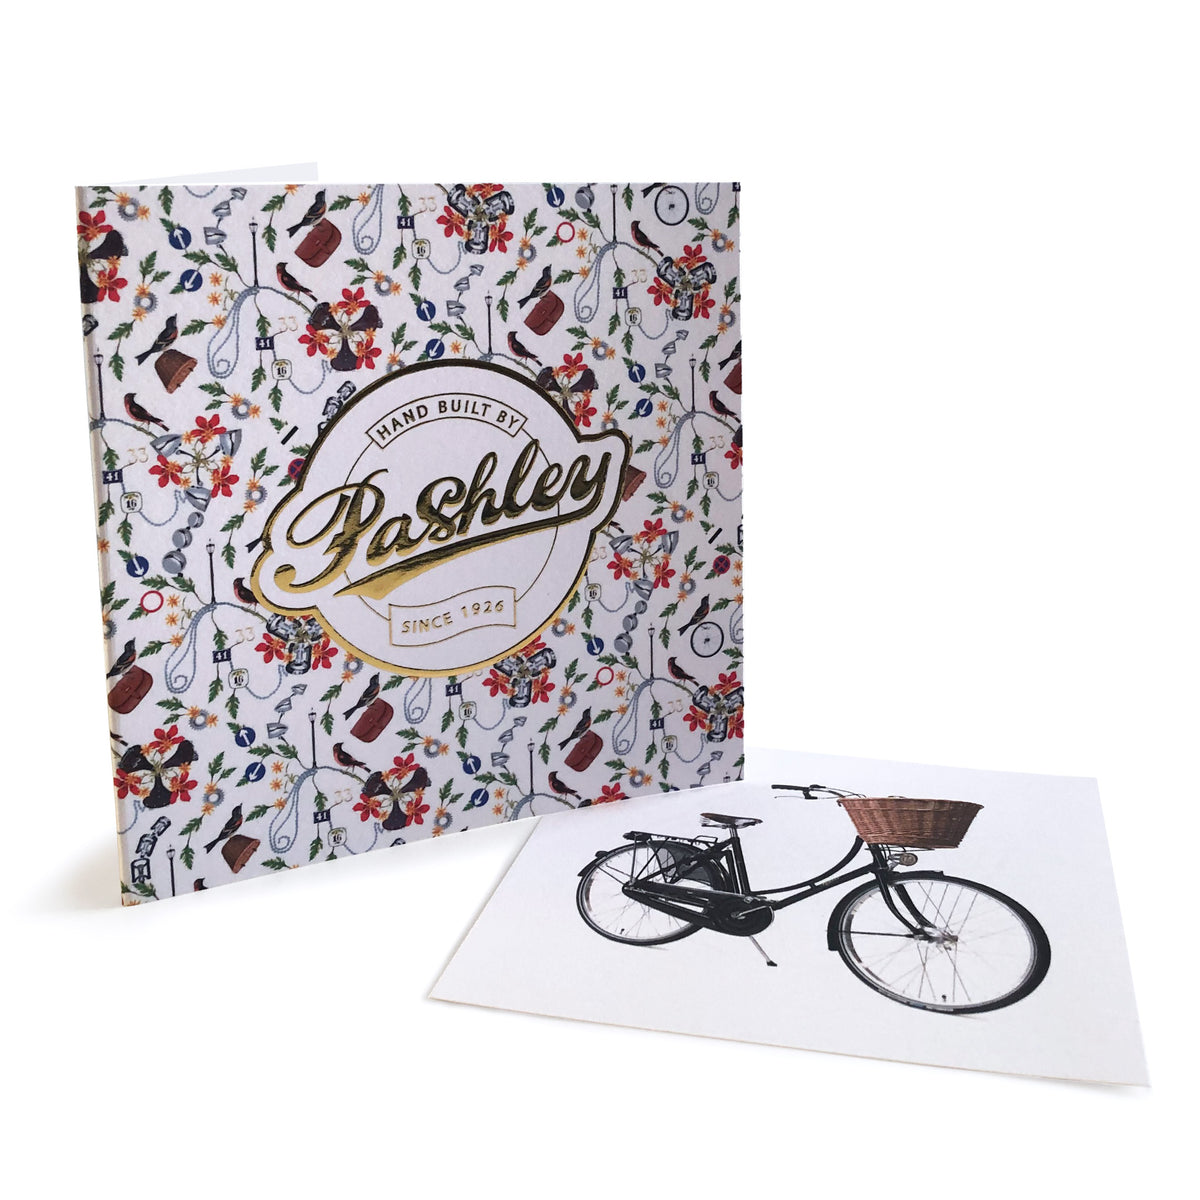 Pashley greetings card with cycle insert